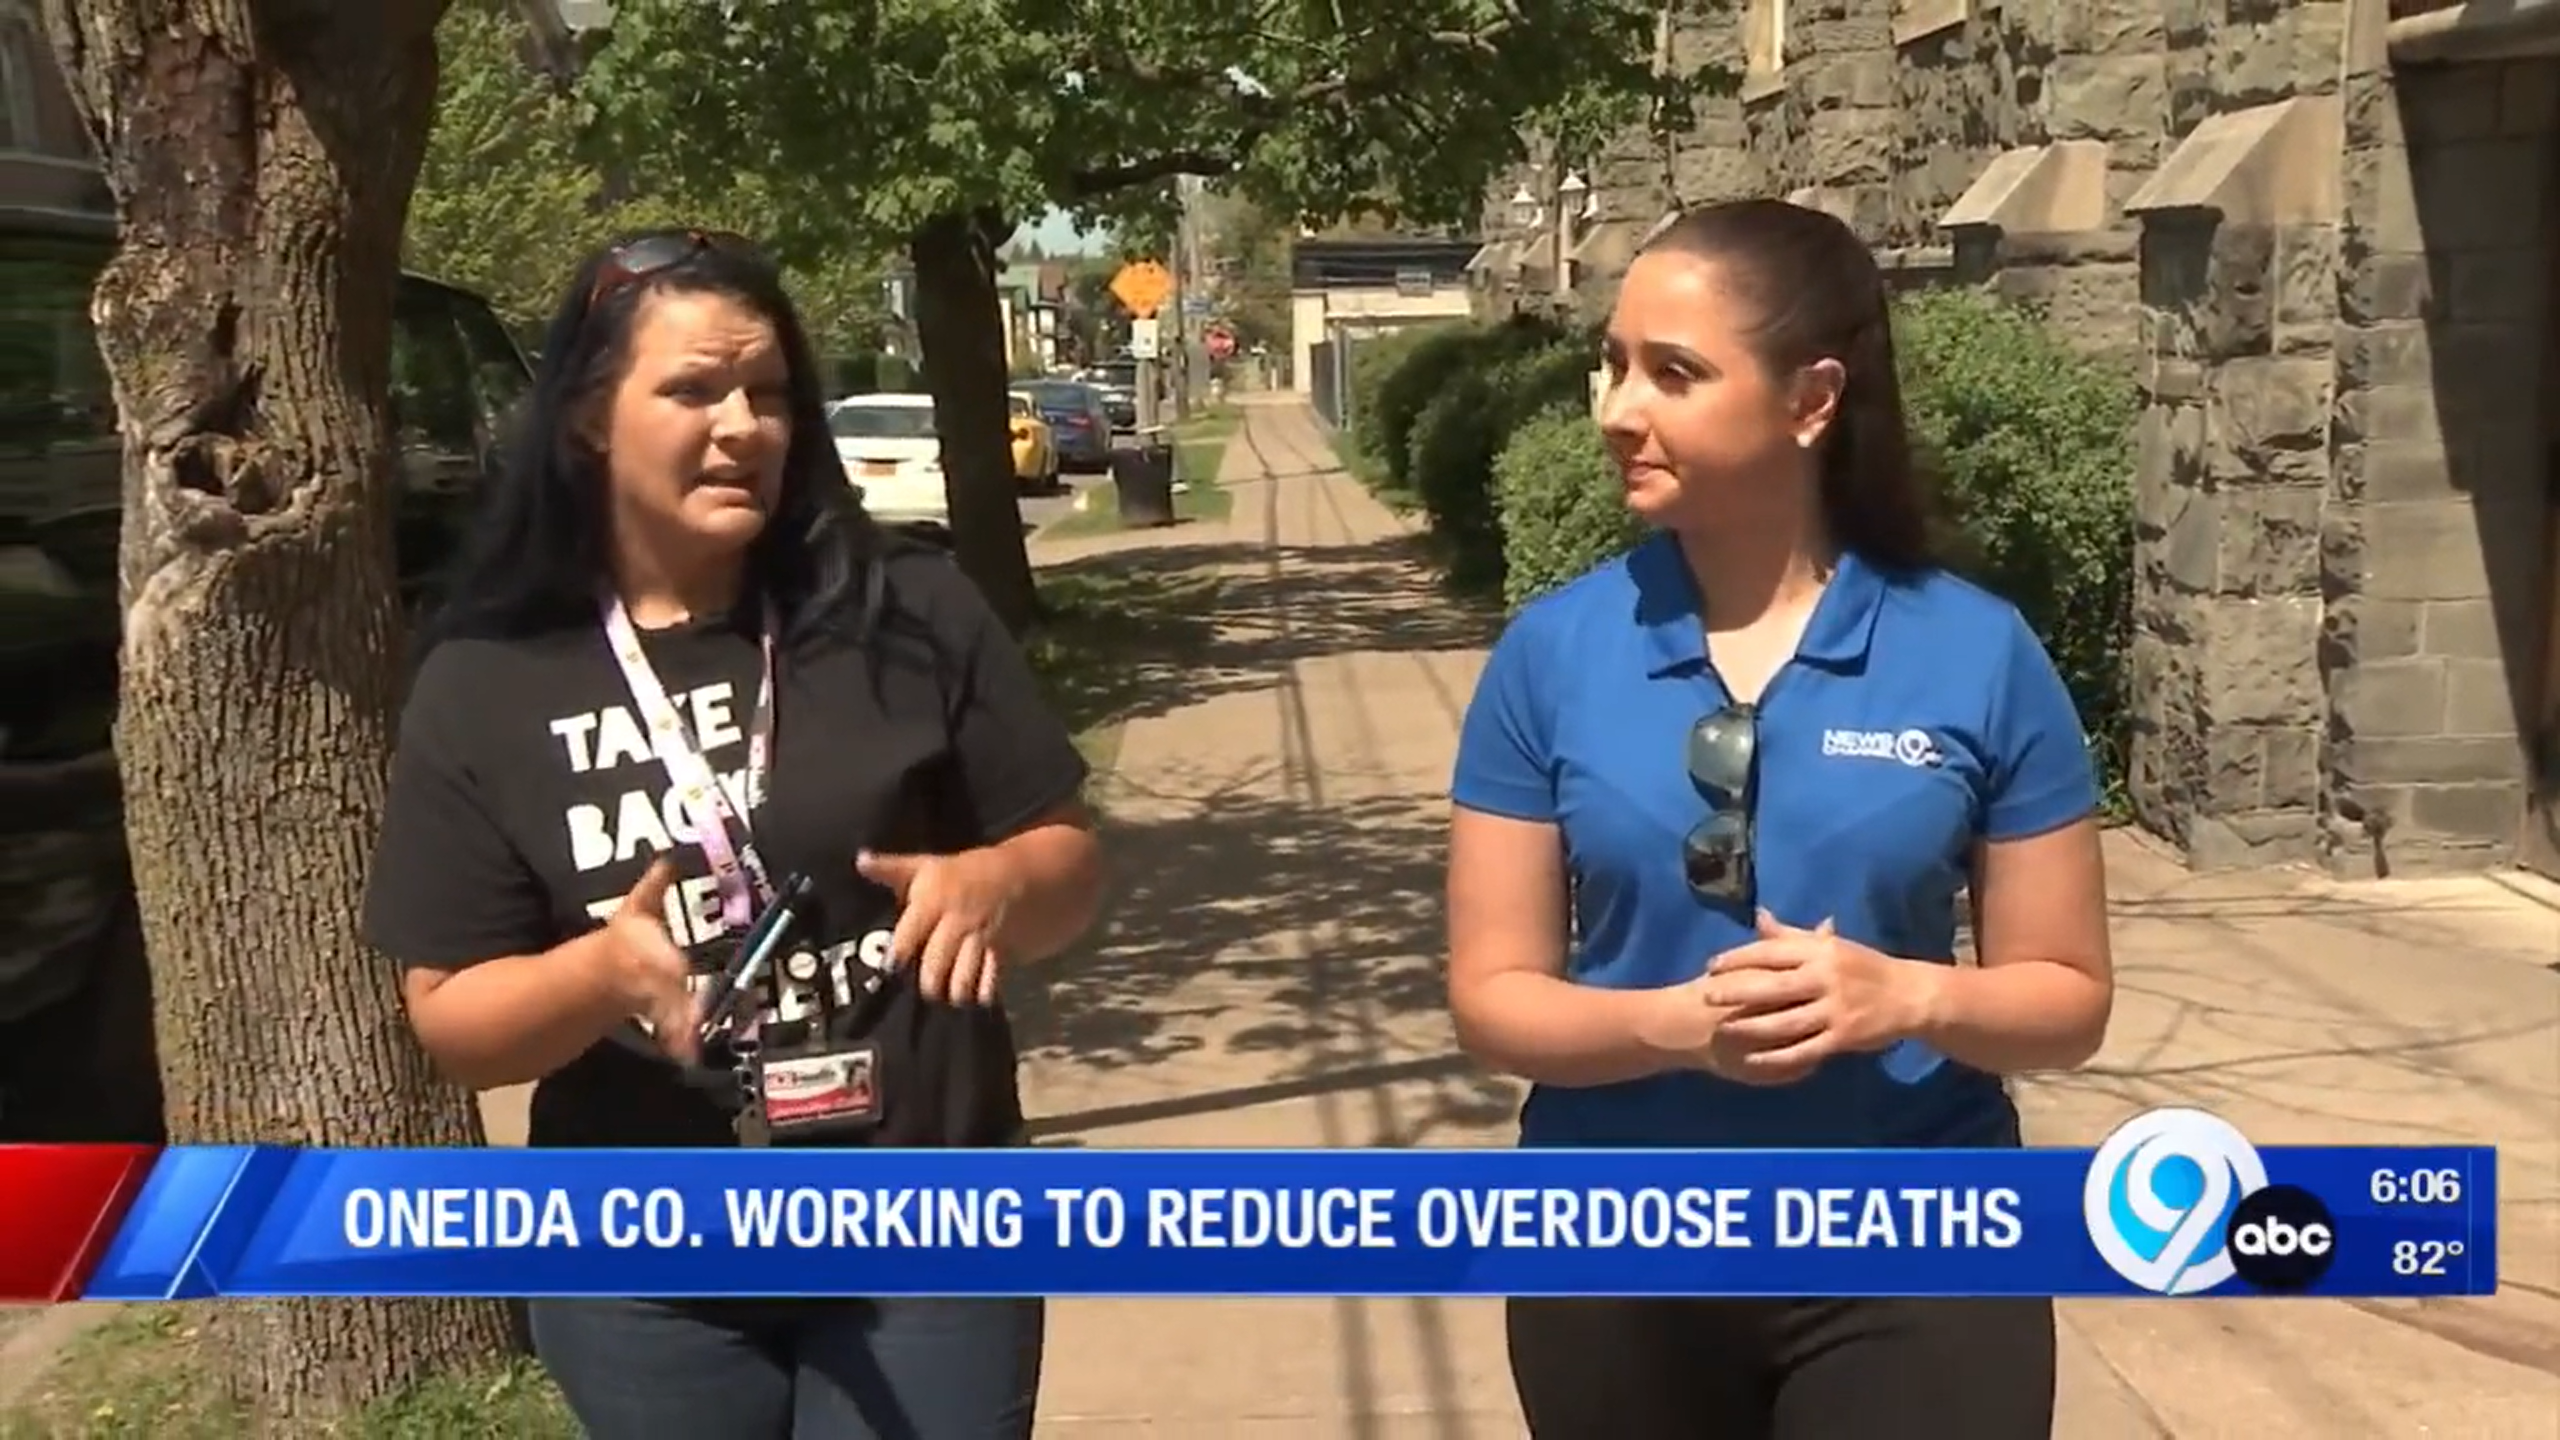 Oneida County Street Engagement Team Working to Reduce Overdose Deaths